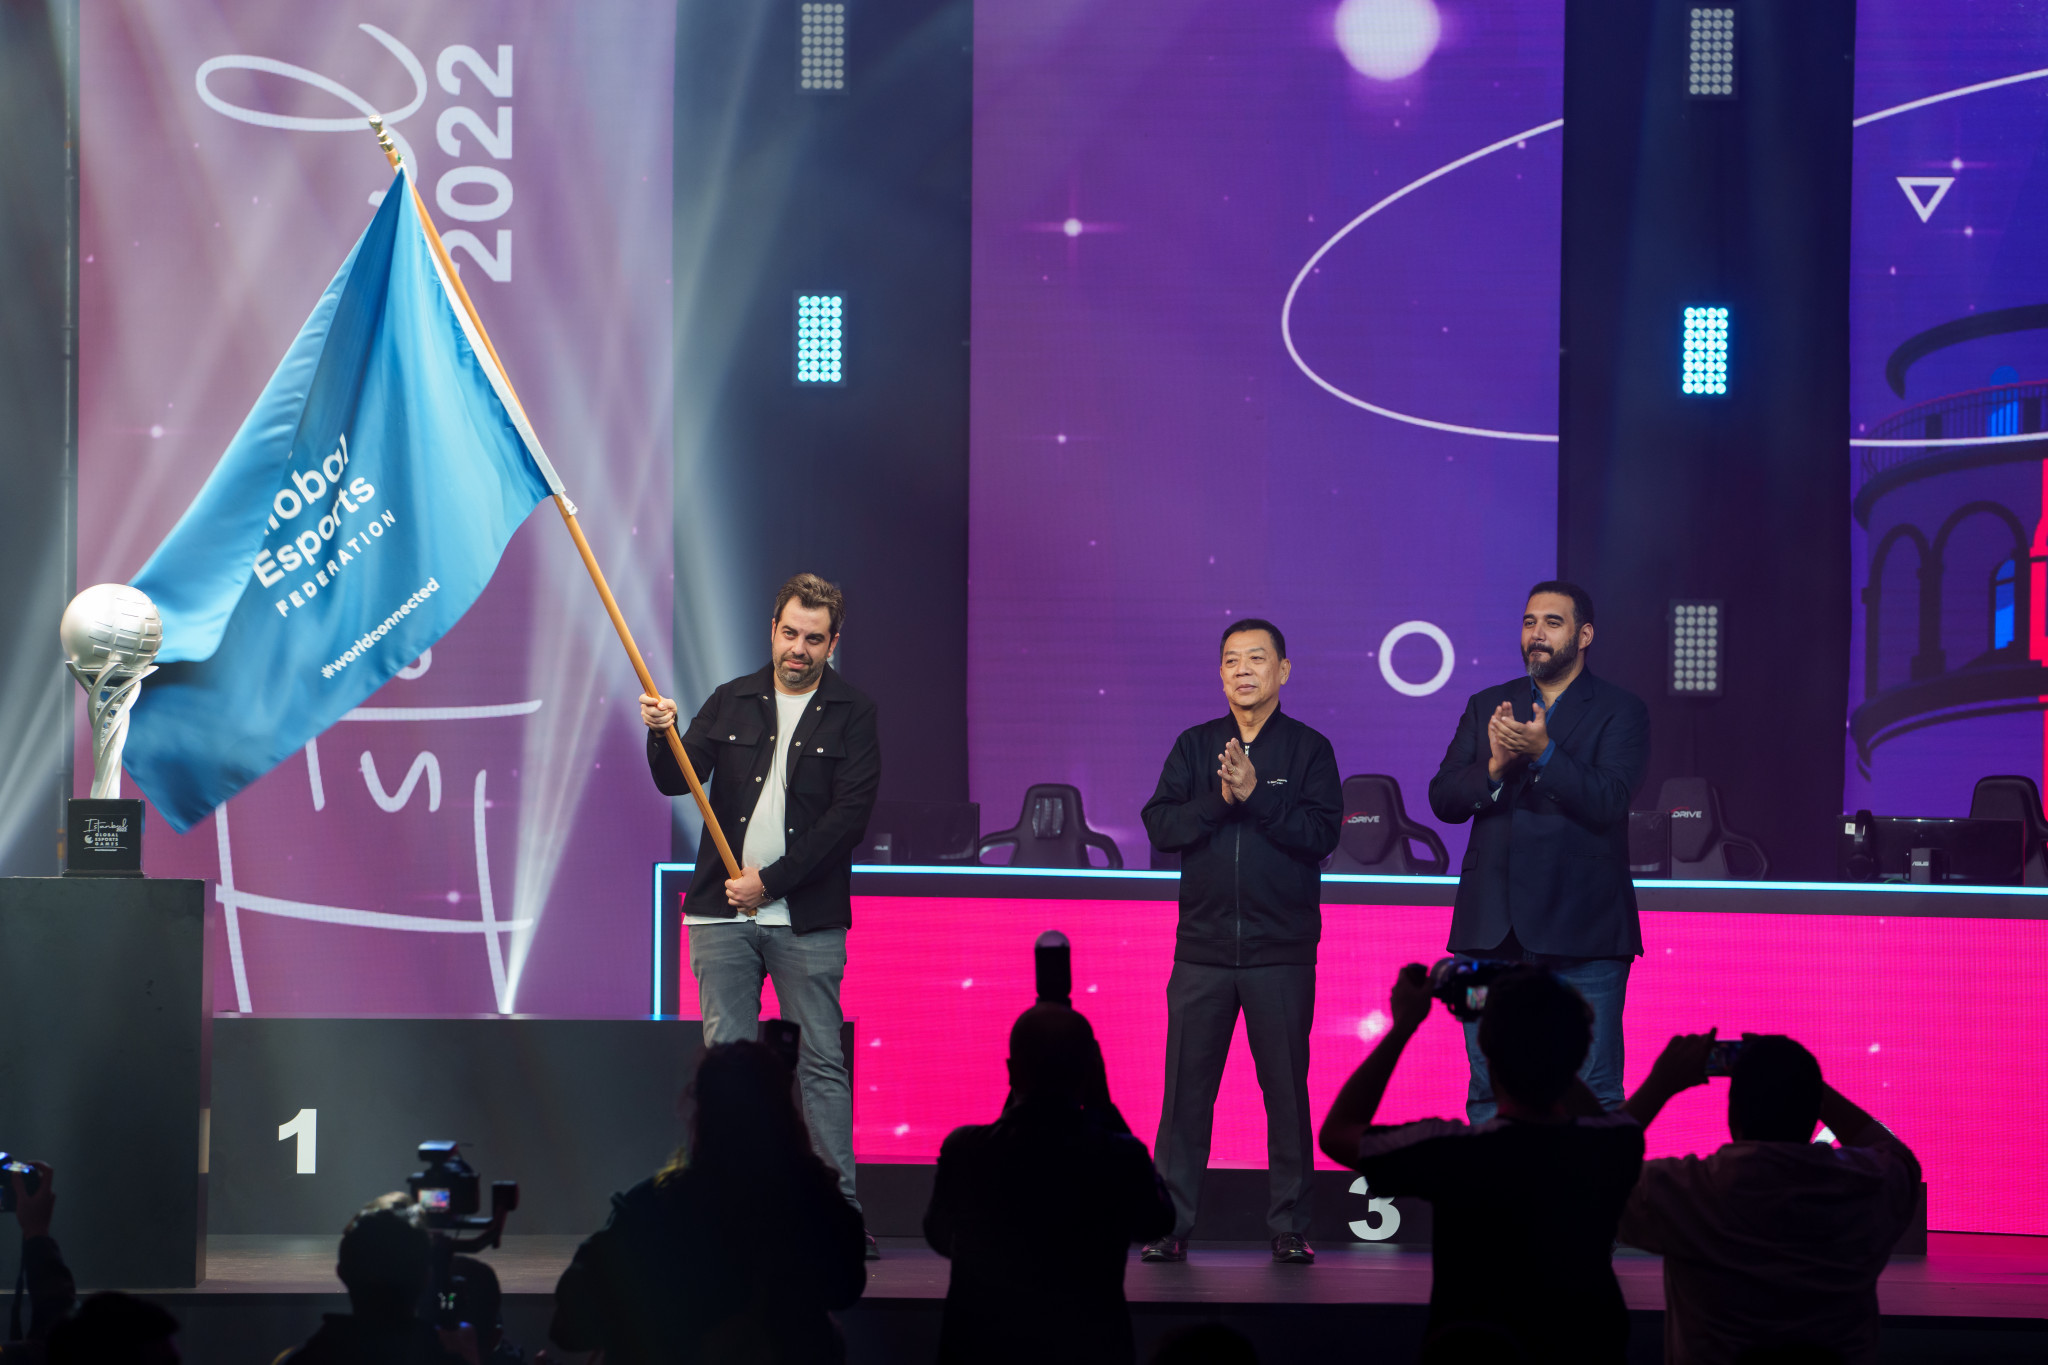 The Global Esports Federation flag was handed over from Istanbul to Riyadh as the Saudi Arabian capital prepares to host the 2023 Games ©Ben Queenborough/GEF